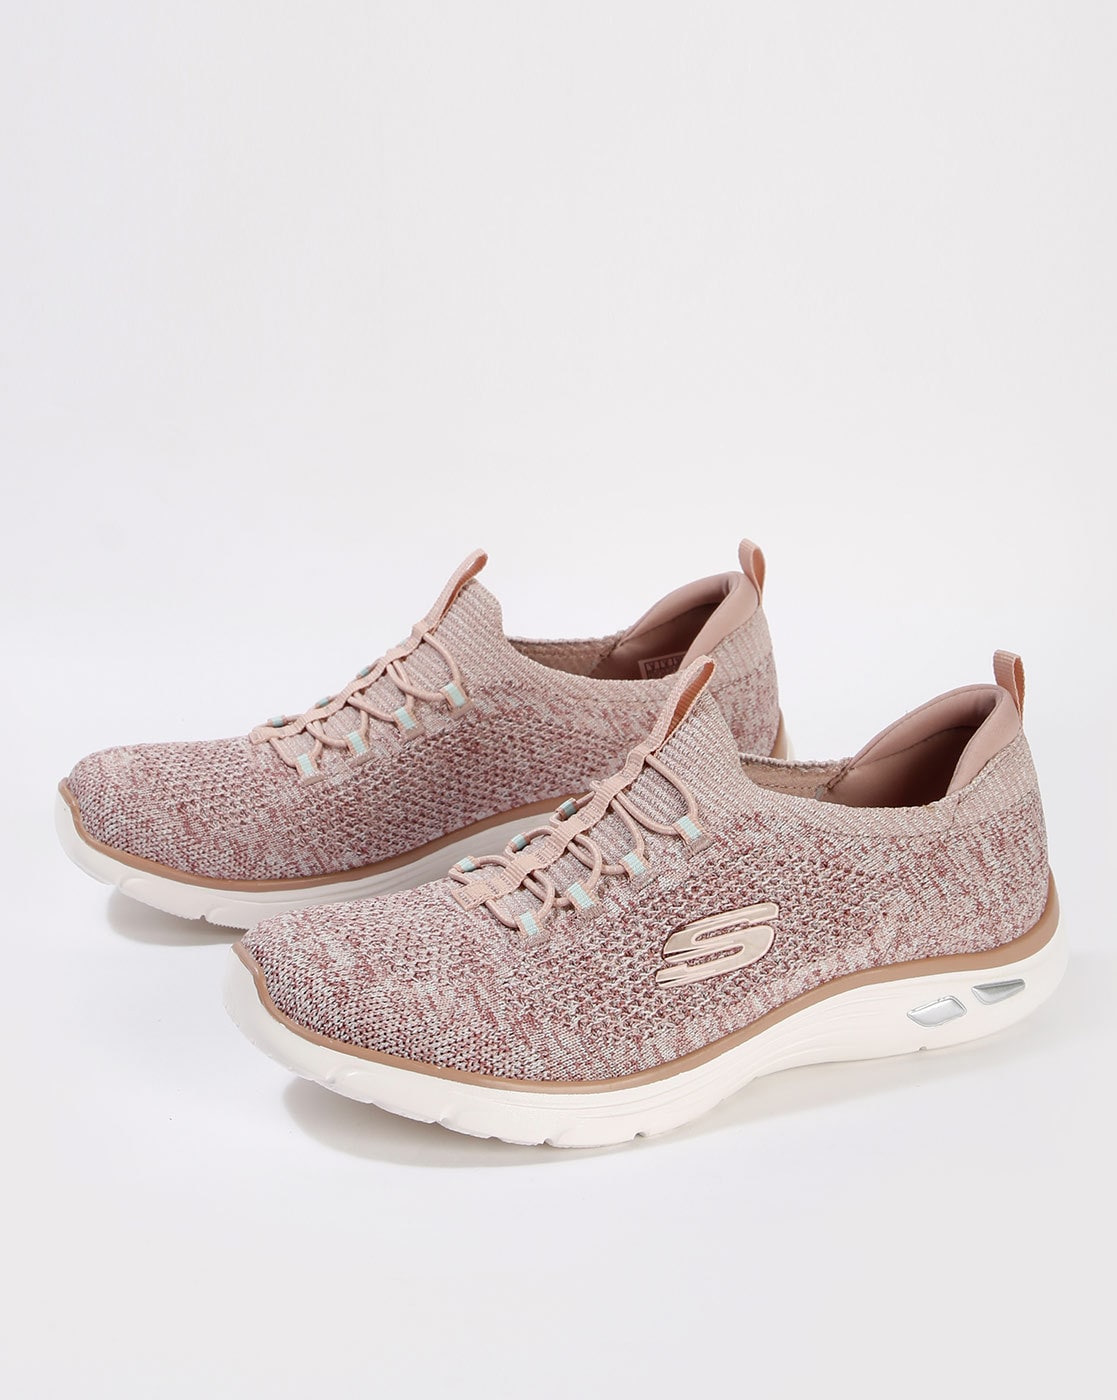 Buy Pink Sports Shoes for Women by |